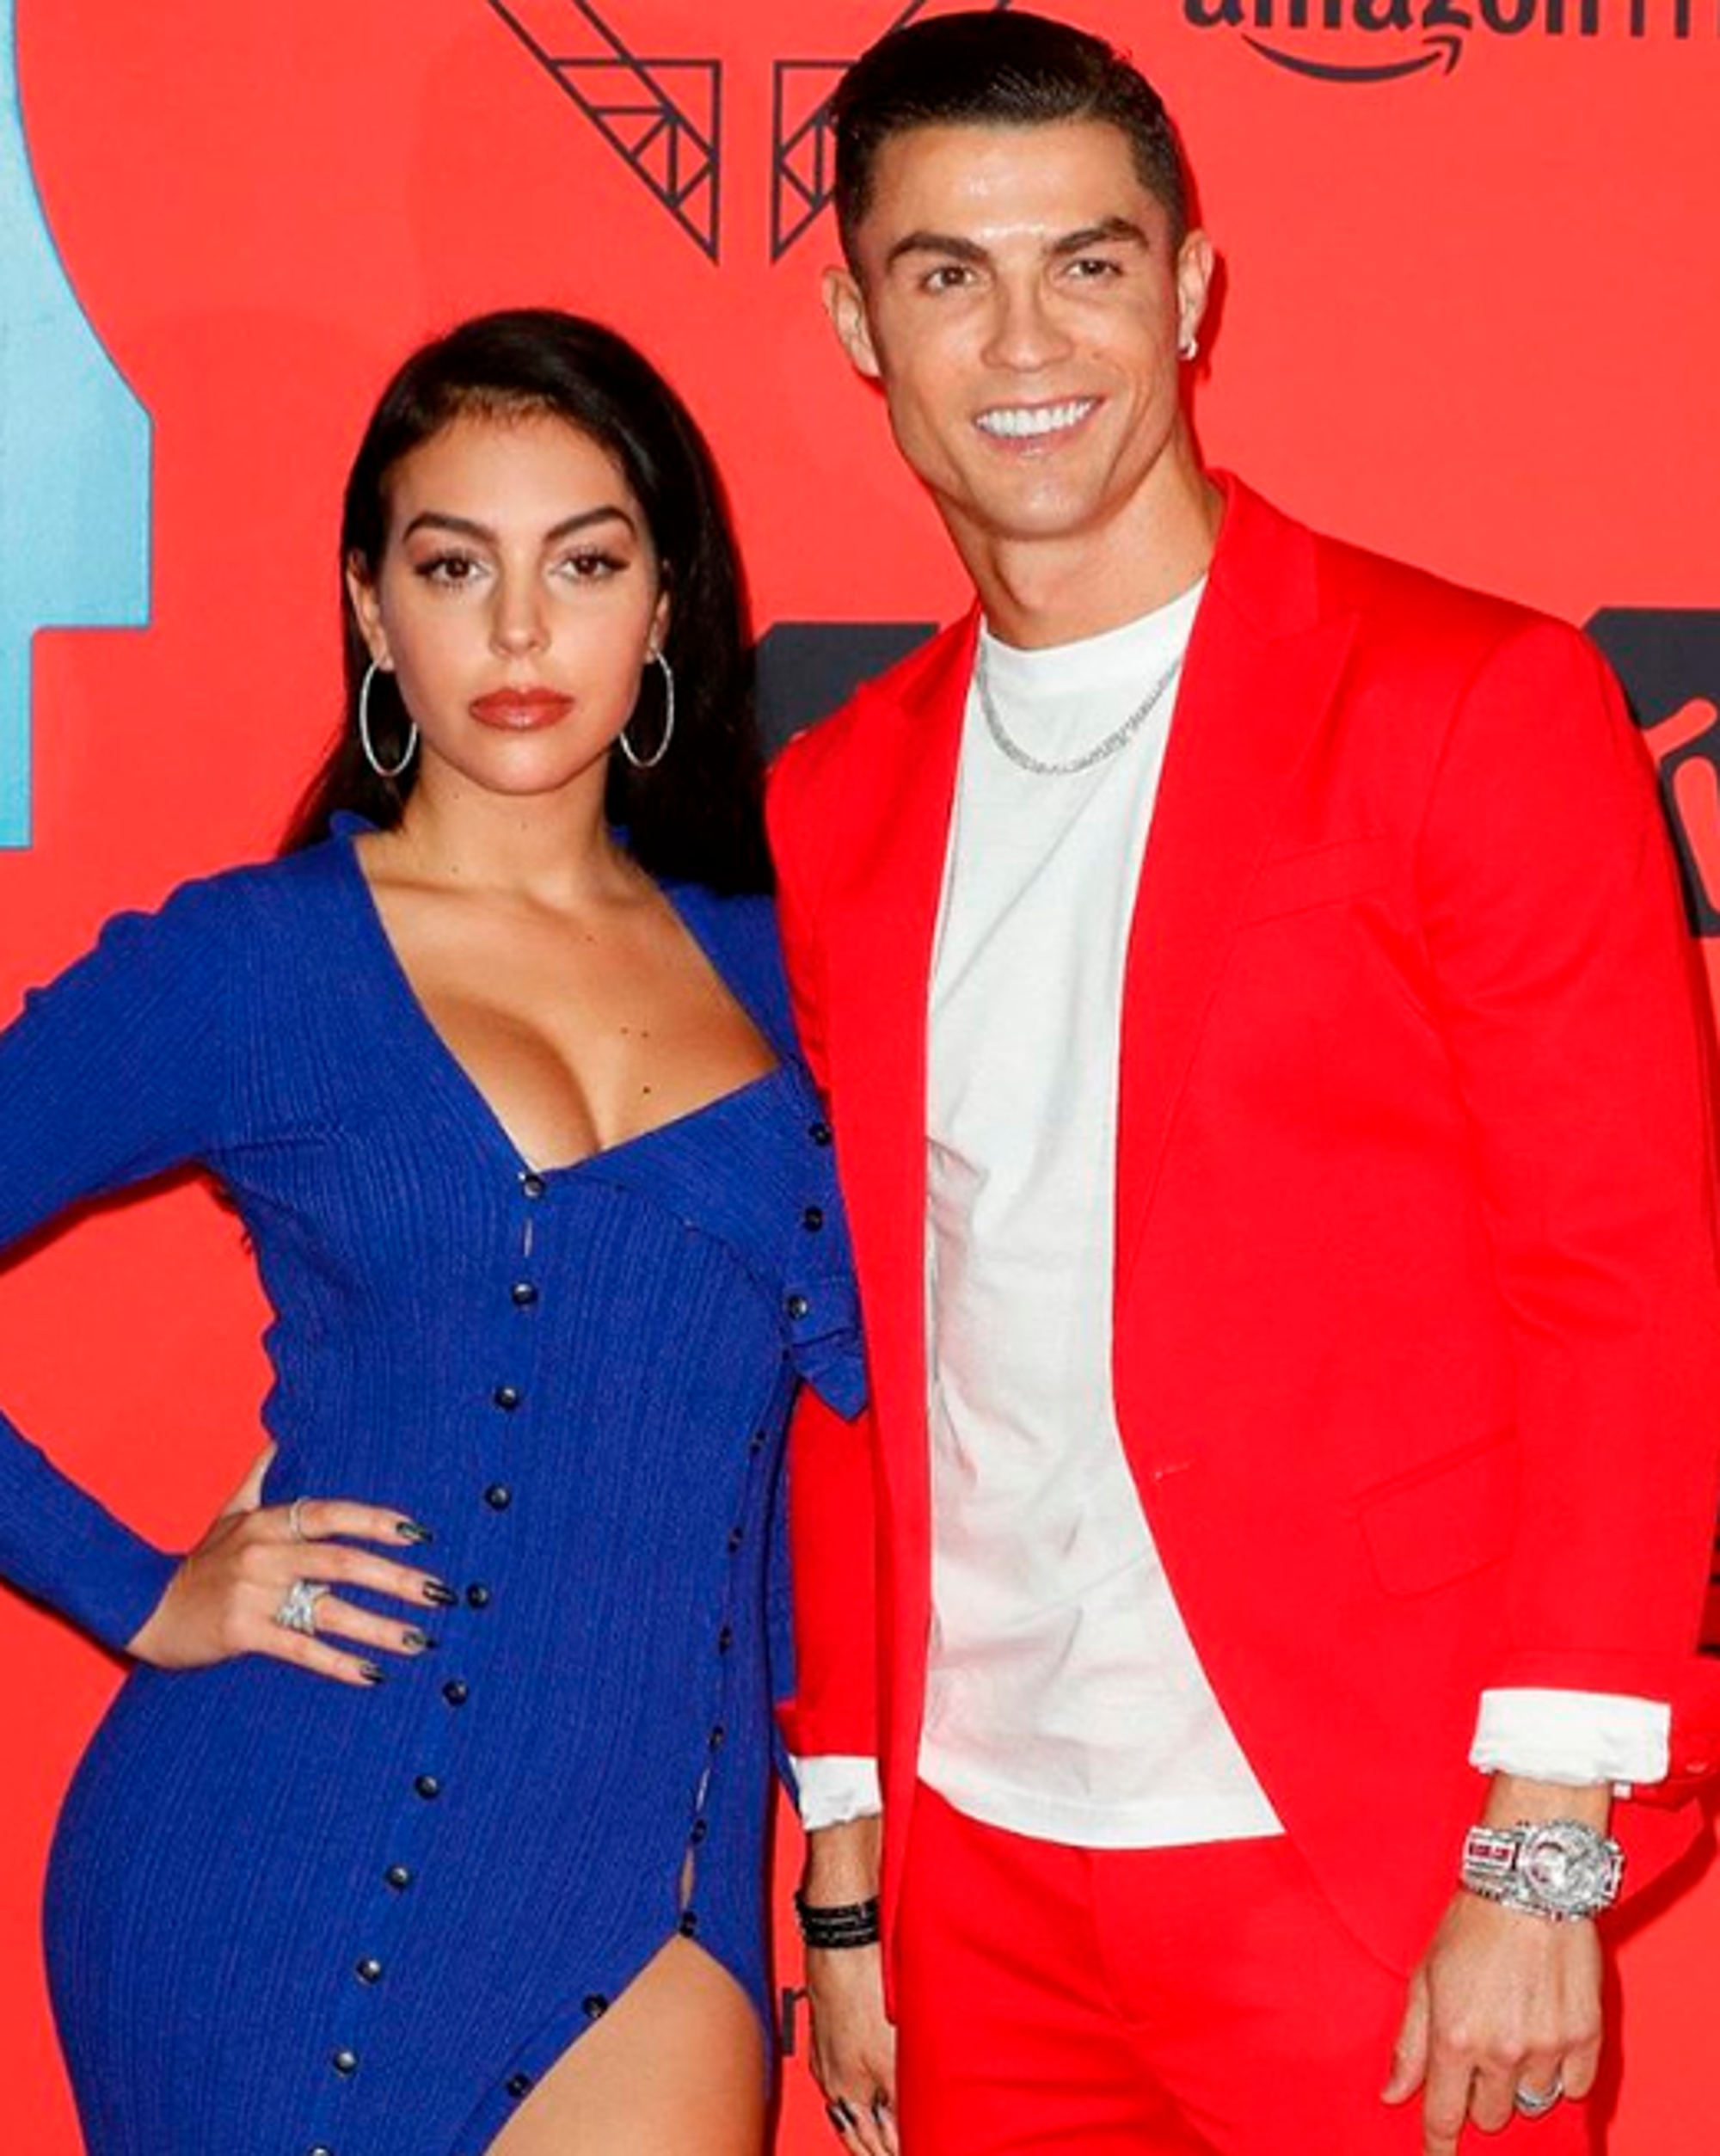 Read more about the article Ronaldo WAG Furious At His Encounter With Hot Model